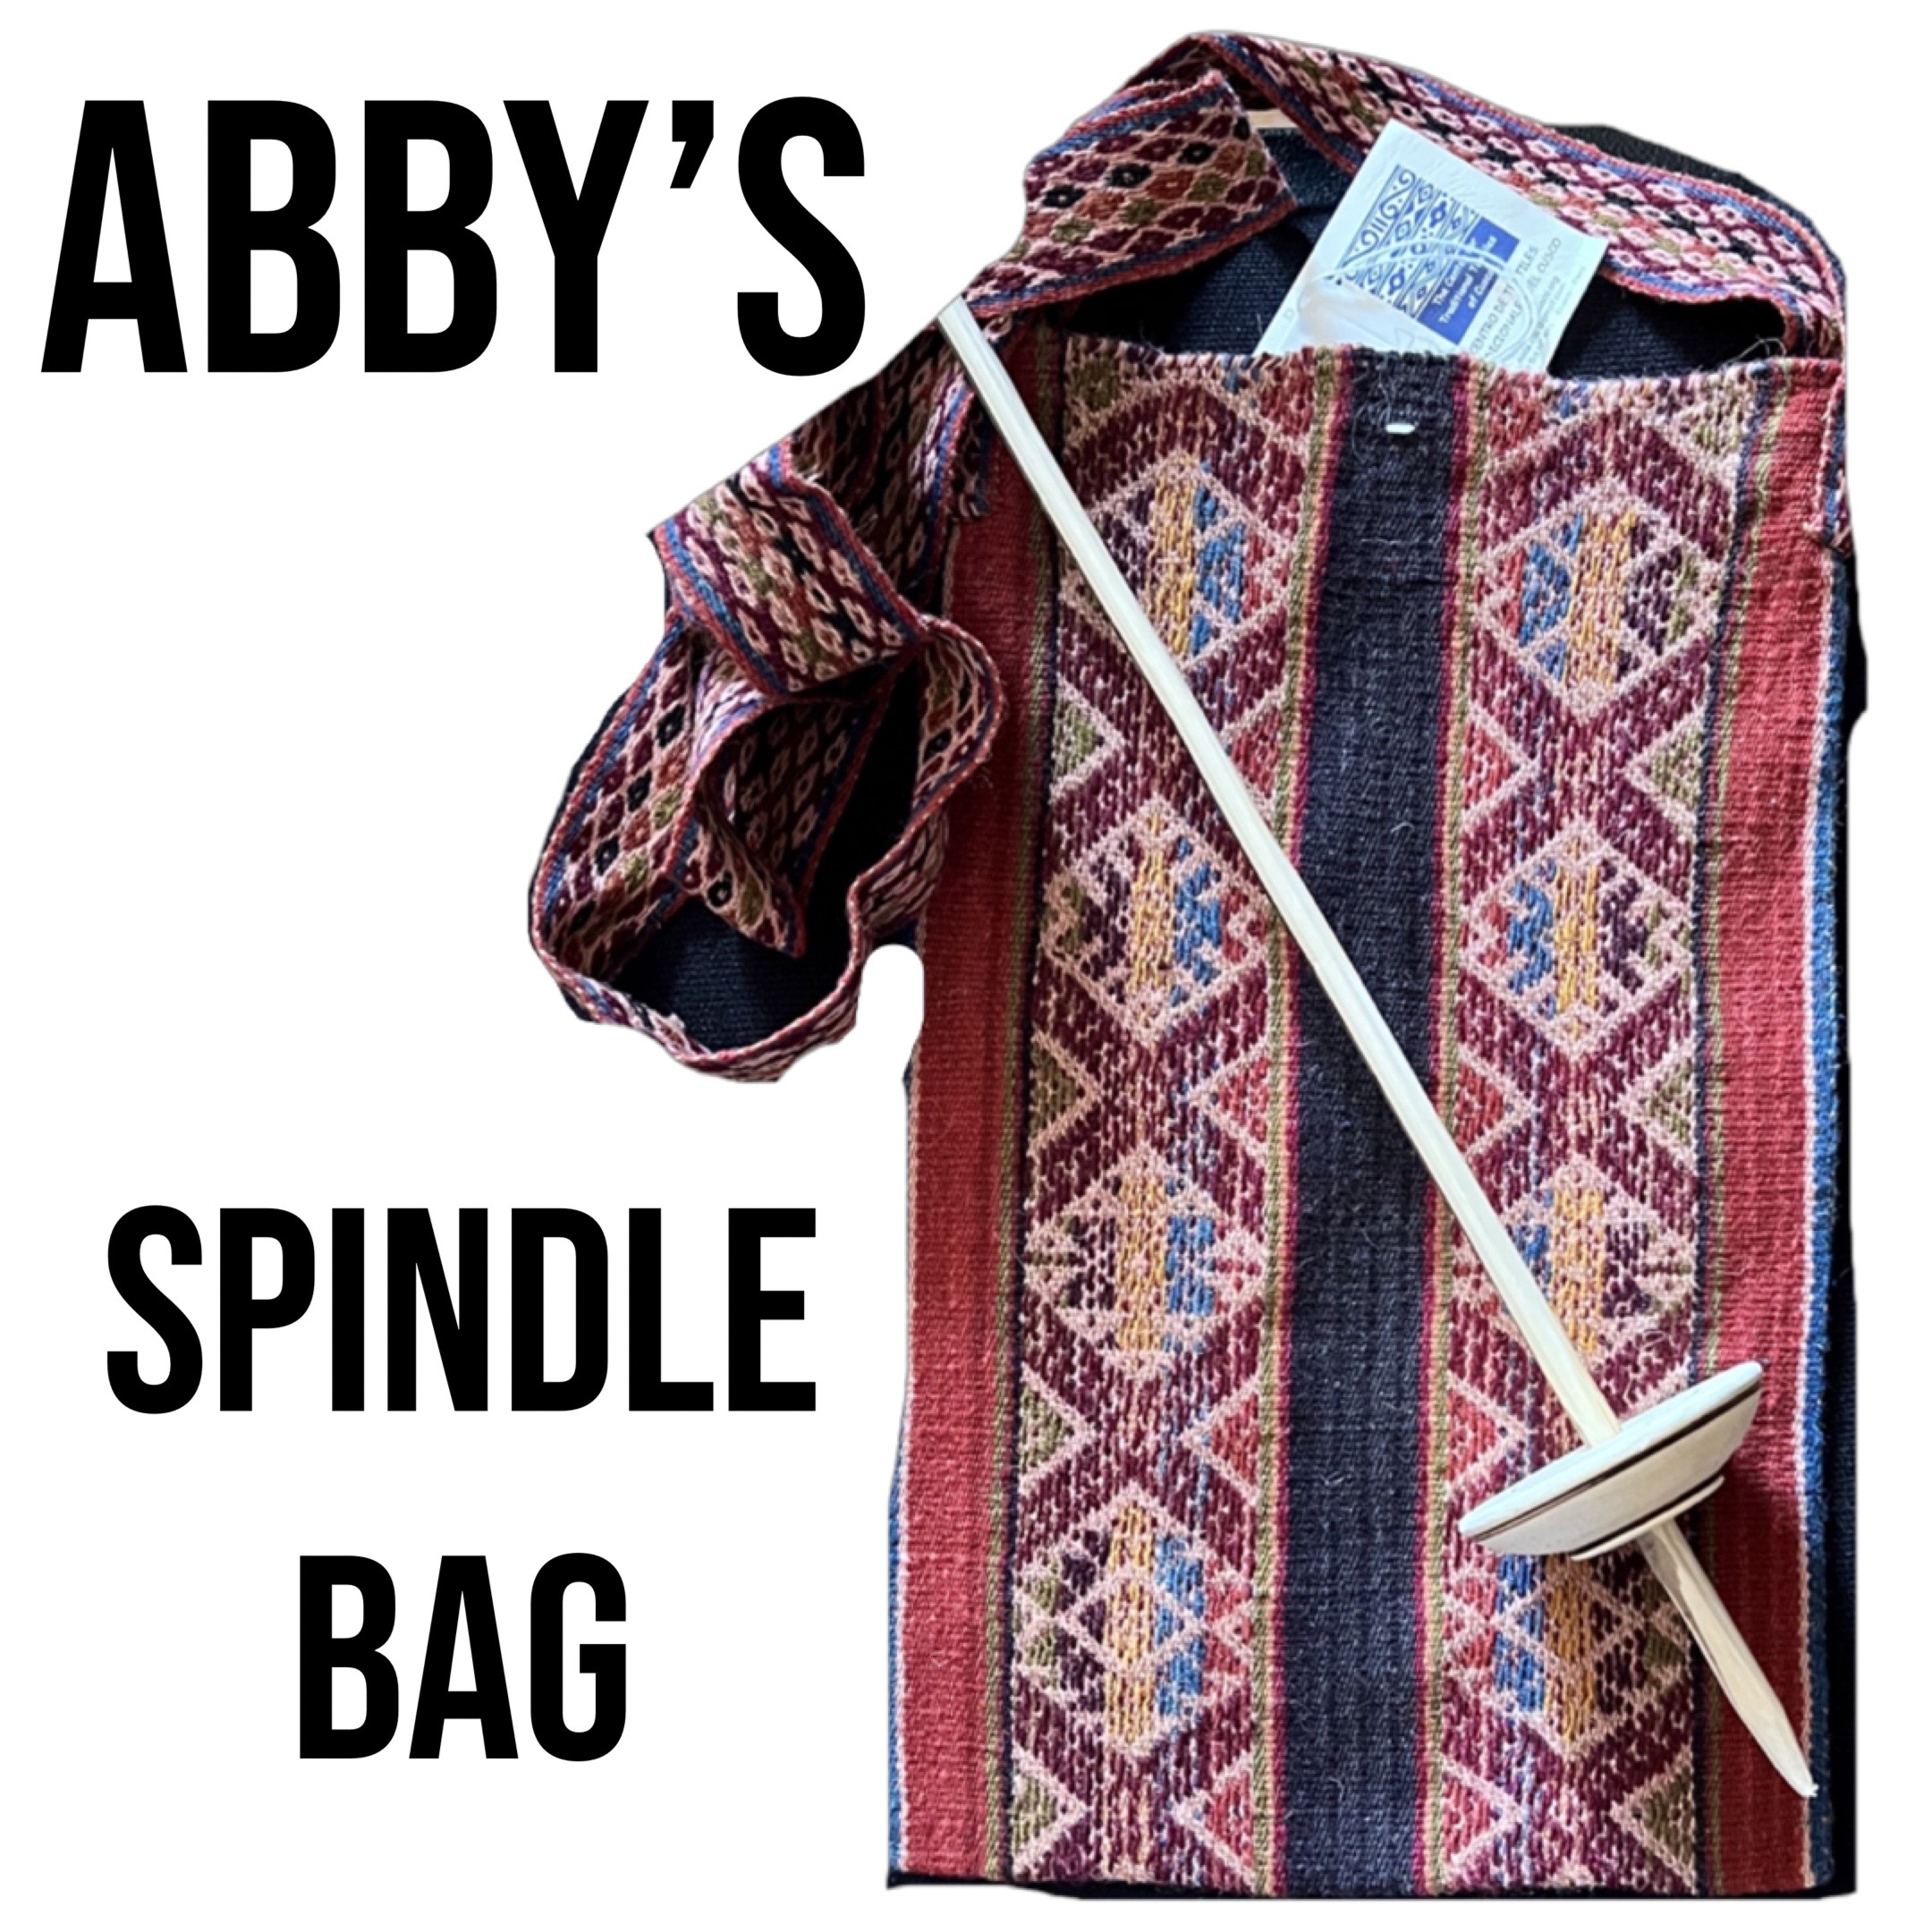 Abby's Spindle Bag